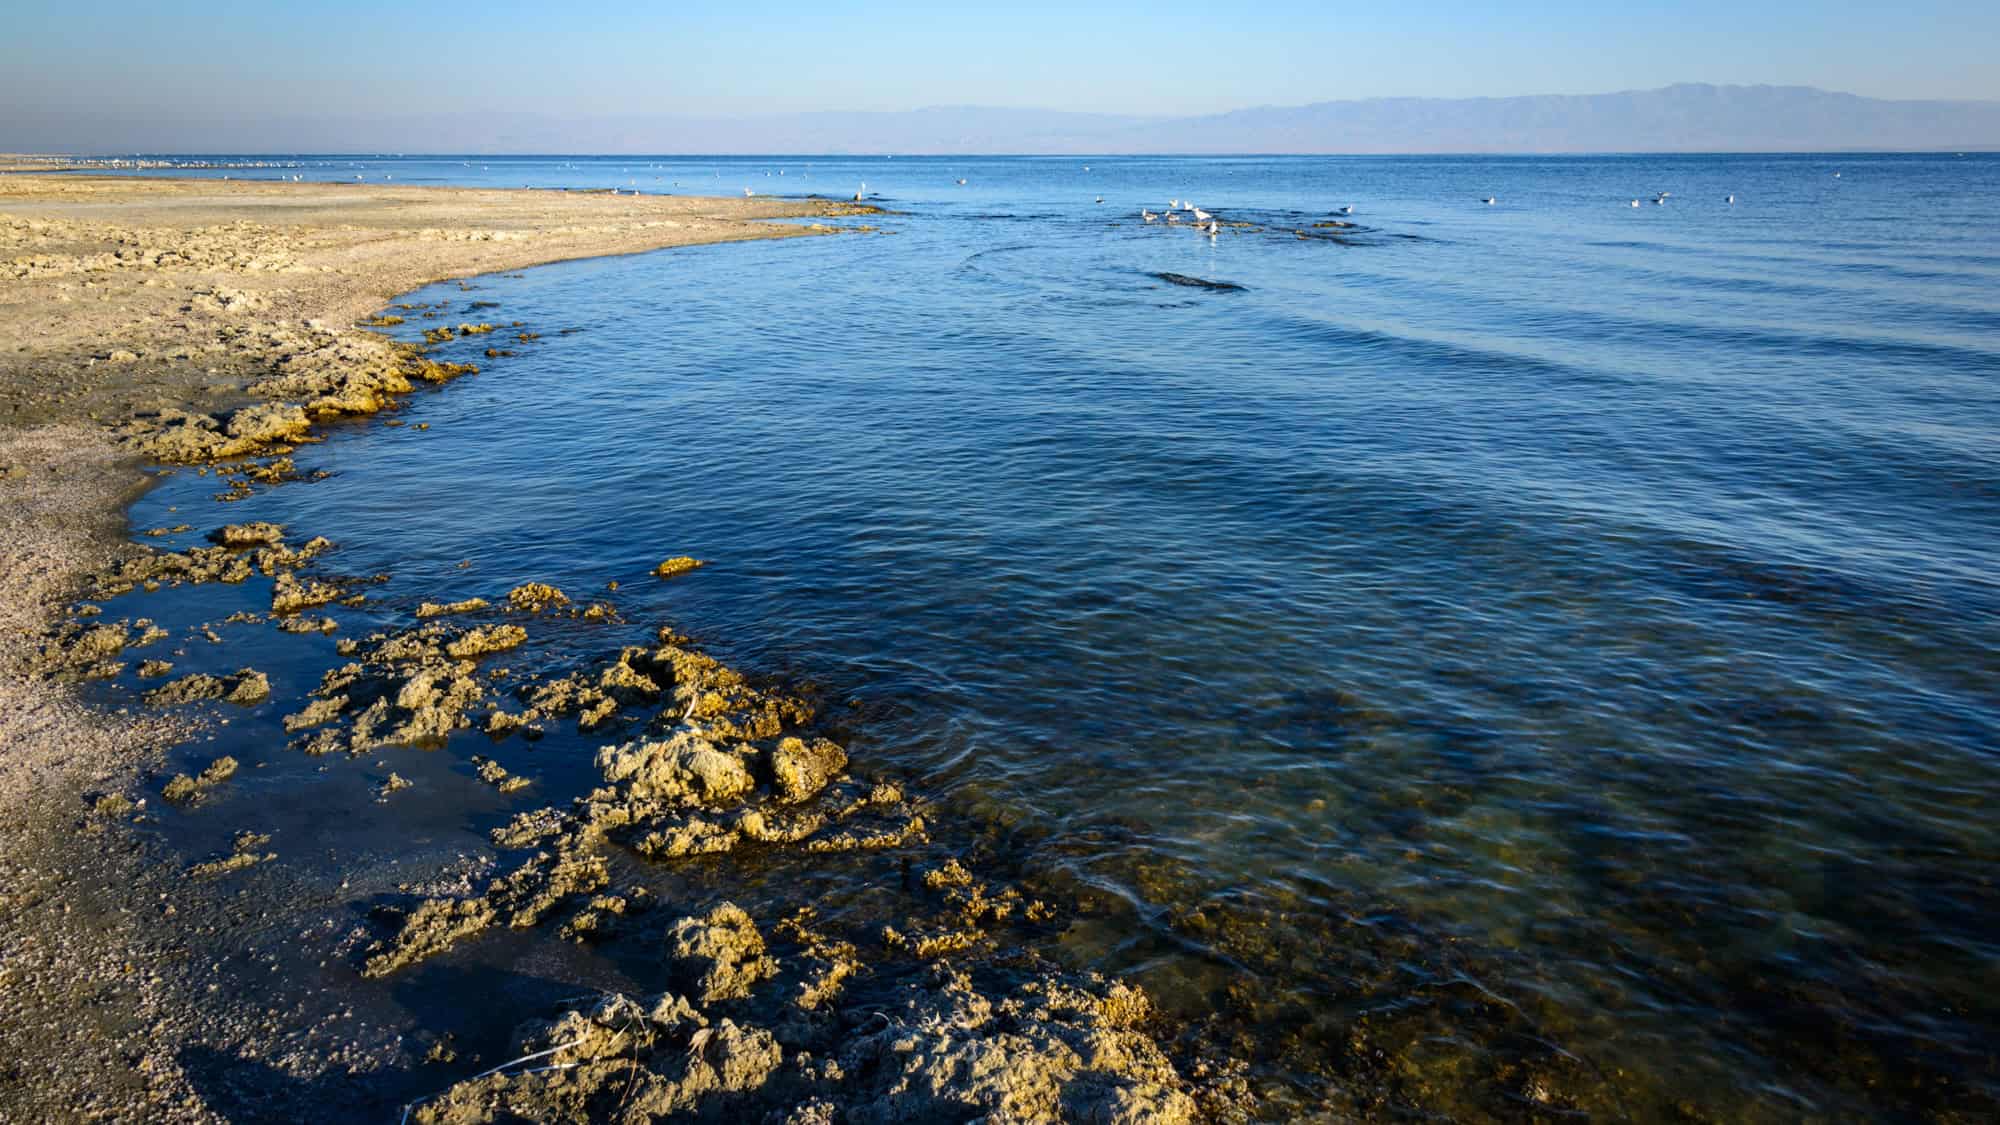 <p>Salton Sea – sounds serene, right? Wrong. Dip a toe in this salty mess, and you’ll regret it quicker than agreeing to a 7 AM meeting. <strong>This inland sea is hyper-saline</strong>, basically meaning it’s salty enough to pickle you, and it’s also a toxic soup of agricultural runoff. </p> <p>Fish die-offs are as common as bad weather forecasts, and decomposing bodies emit hydrogen sulfide, making the air smell like rotten eggs. Add in the occasional algae bloom, turning the waters into a neon green nightmare, and you’ve got yourself one heck of a disastrous dip location.</p>